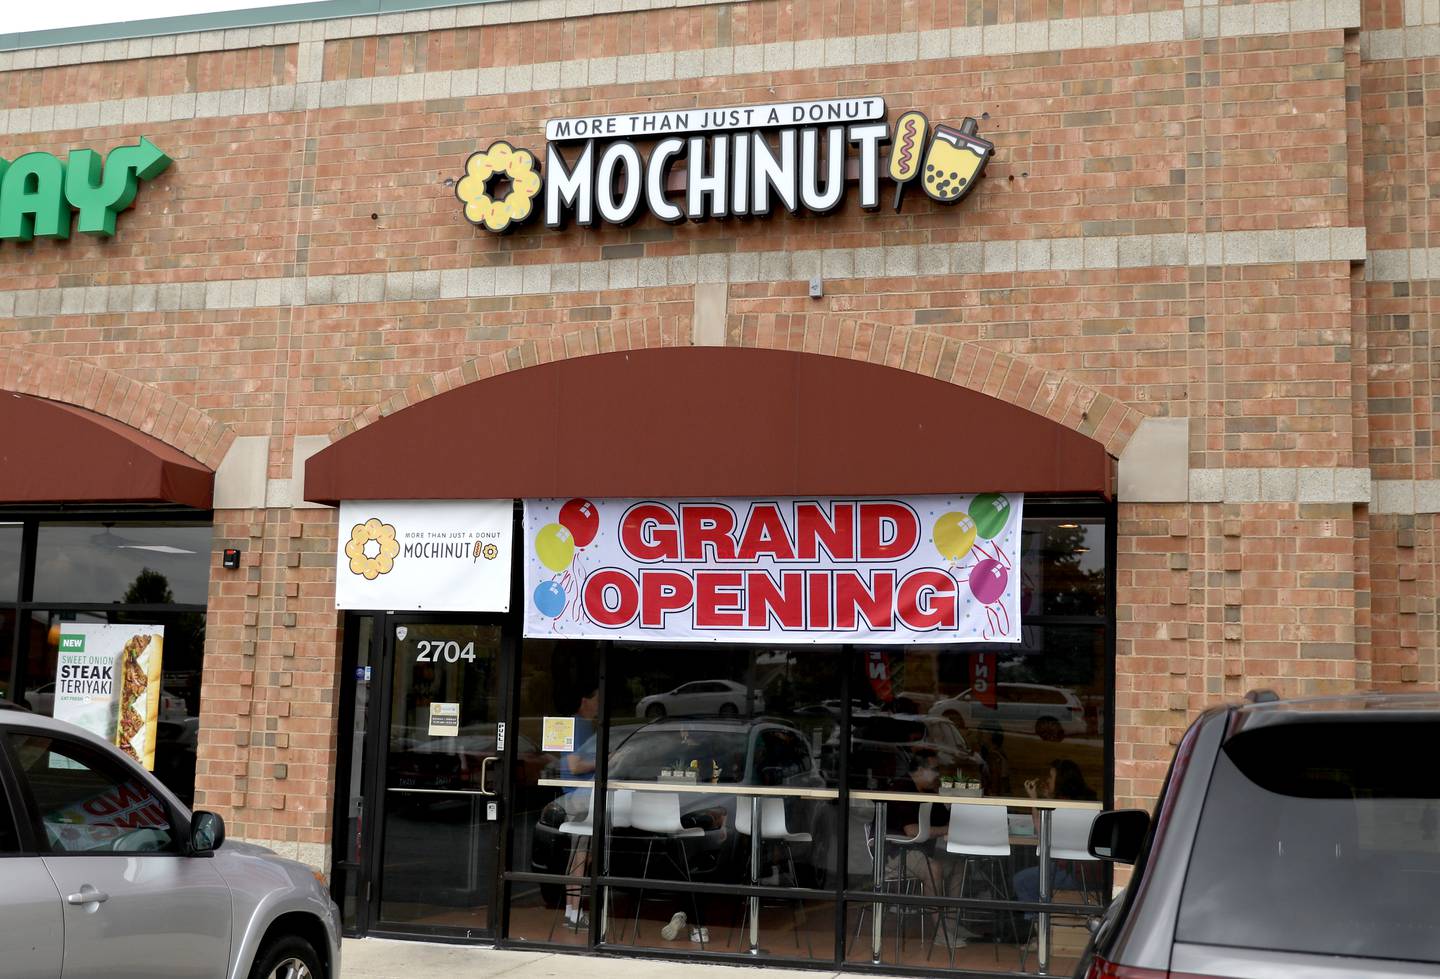 Mochinut recently opened at 2704 E. Main St. in the Foxfield Commons shopping center in St. Charles. A mochi donut is a donut that originated from Hawaii and is a combination of American doughnuts and Japanese mochi.